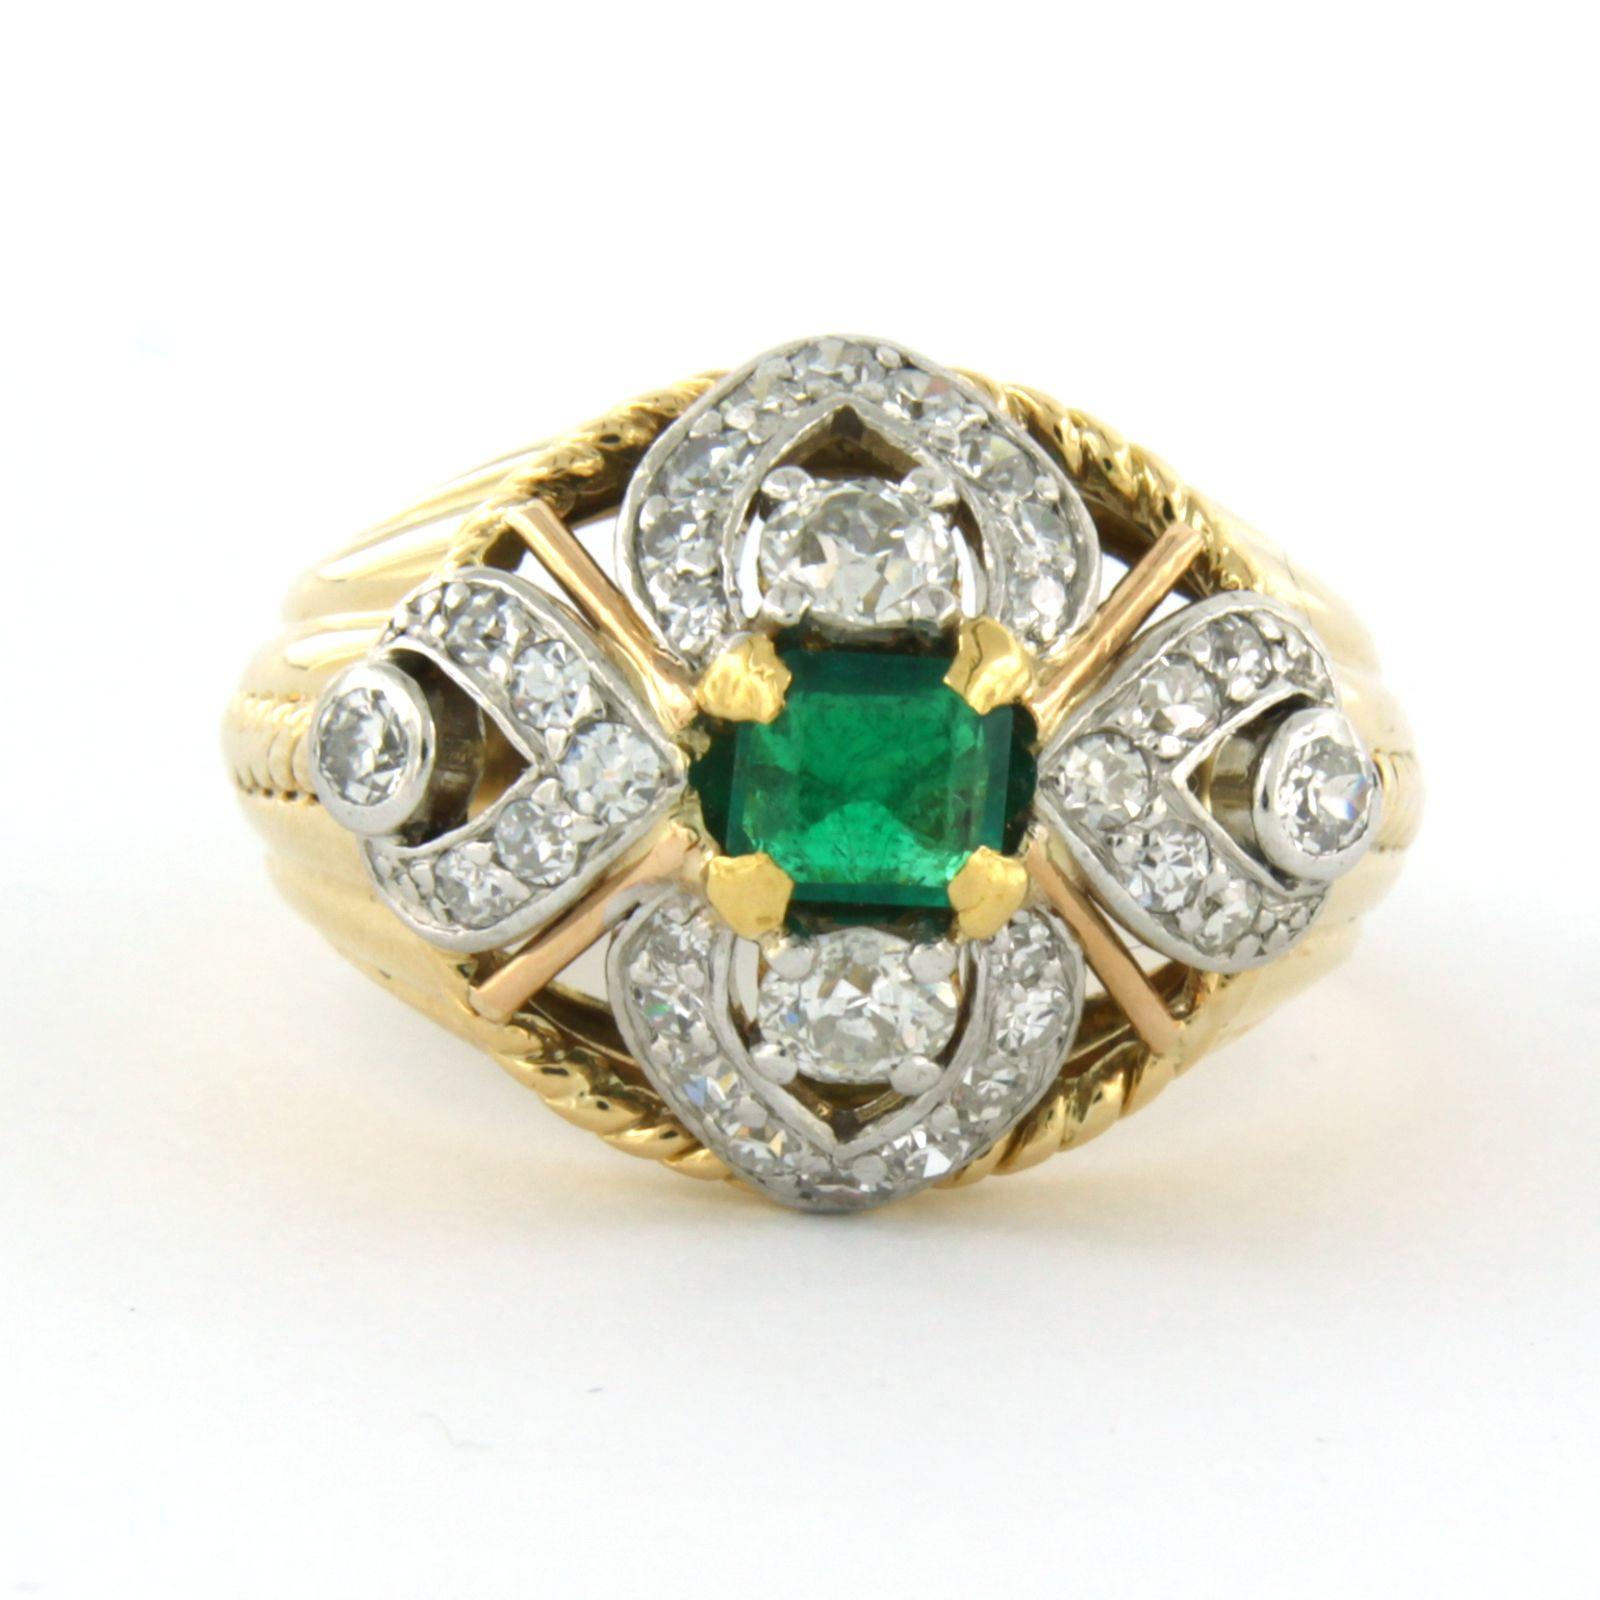 ART NOUVEAU - 18k bicolour gold ring set with emerald and diamond 1.00 ct - F/G- VS/SI, ring size U.S. 7.5 - EU. 17.75(56)

detailed description:

the top of the ring is 1.4 cm wide by 7.4 mm high

Ring size U.S. 7.5 - EU. 17.75(56), ring can be